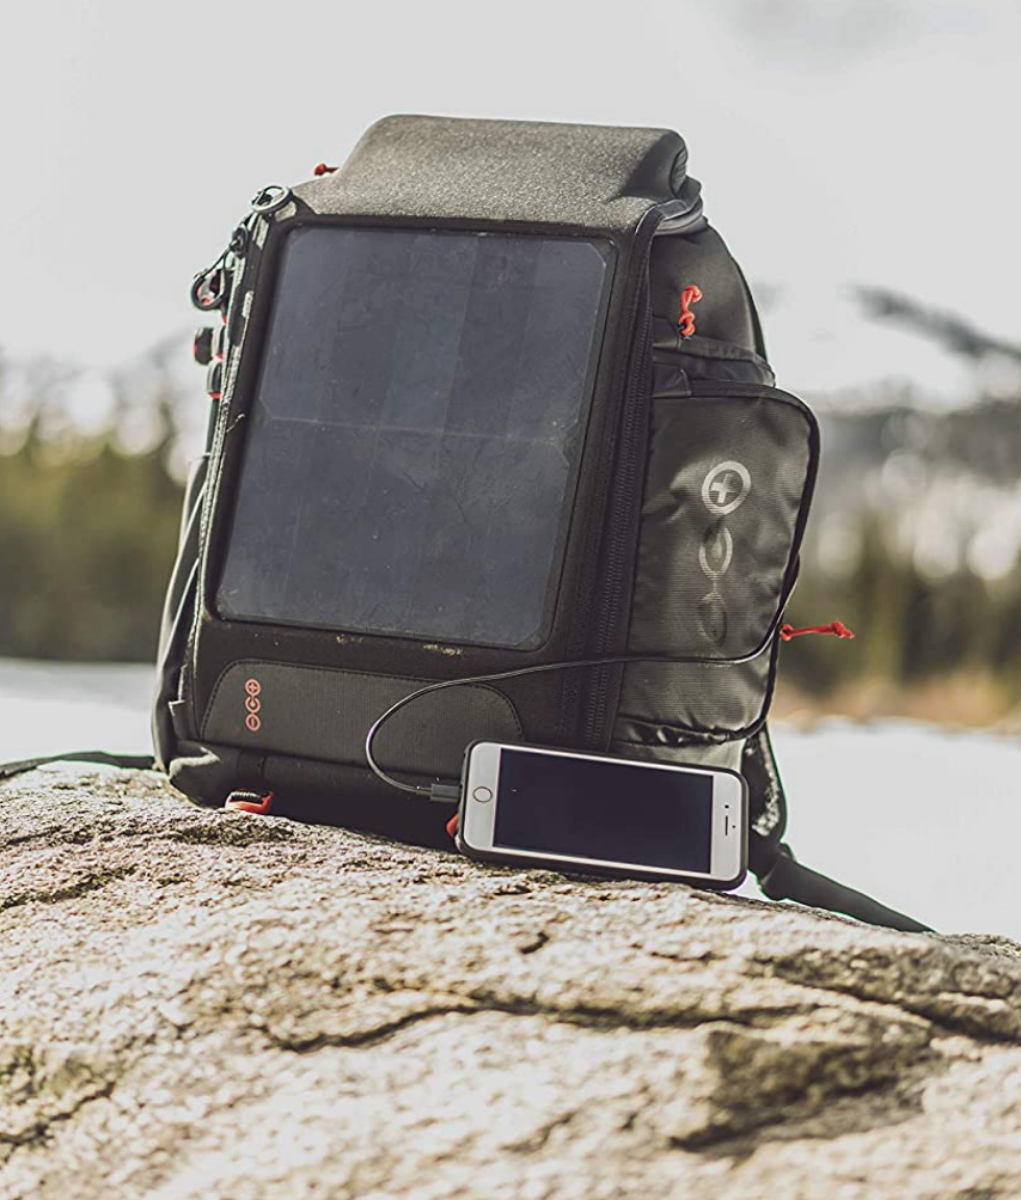 A Voltaic Systems OffGrid Solar Backpack Charger charging a smartphone